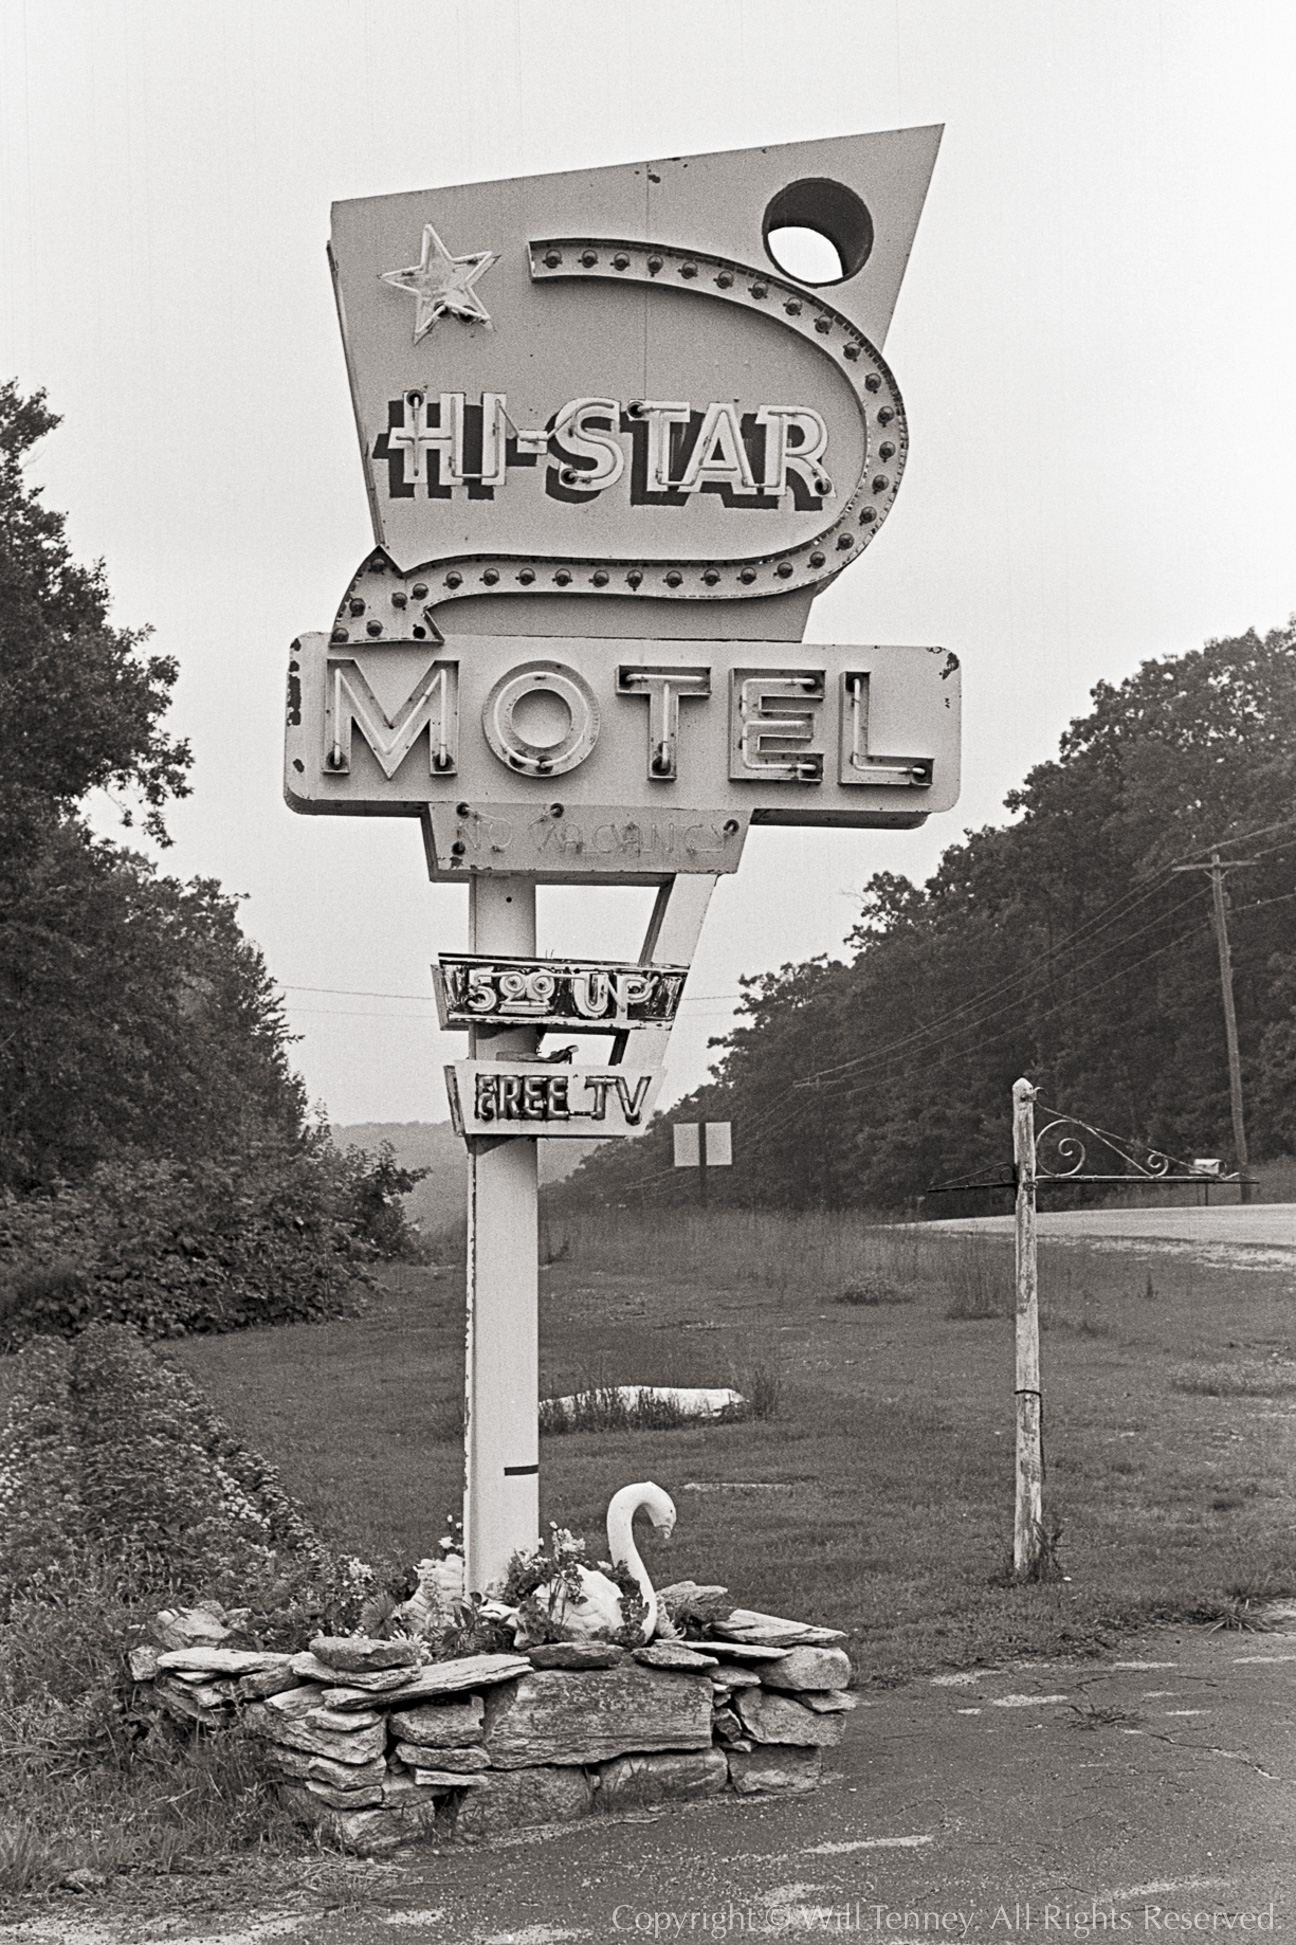 Hi-Star Motel: Photograph by Will Tenney